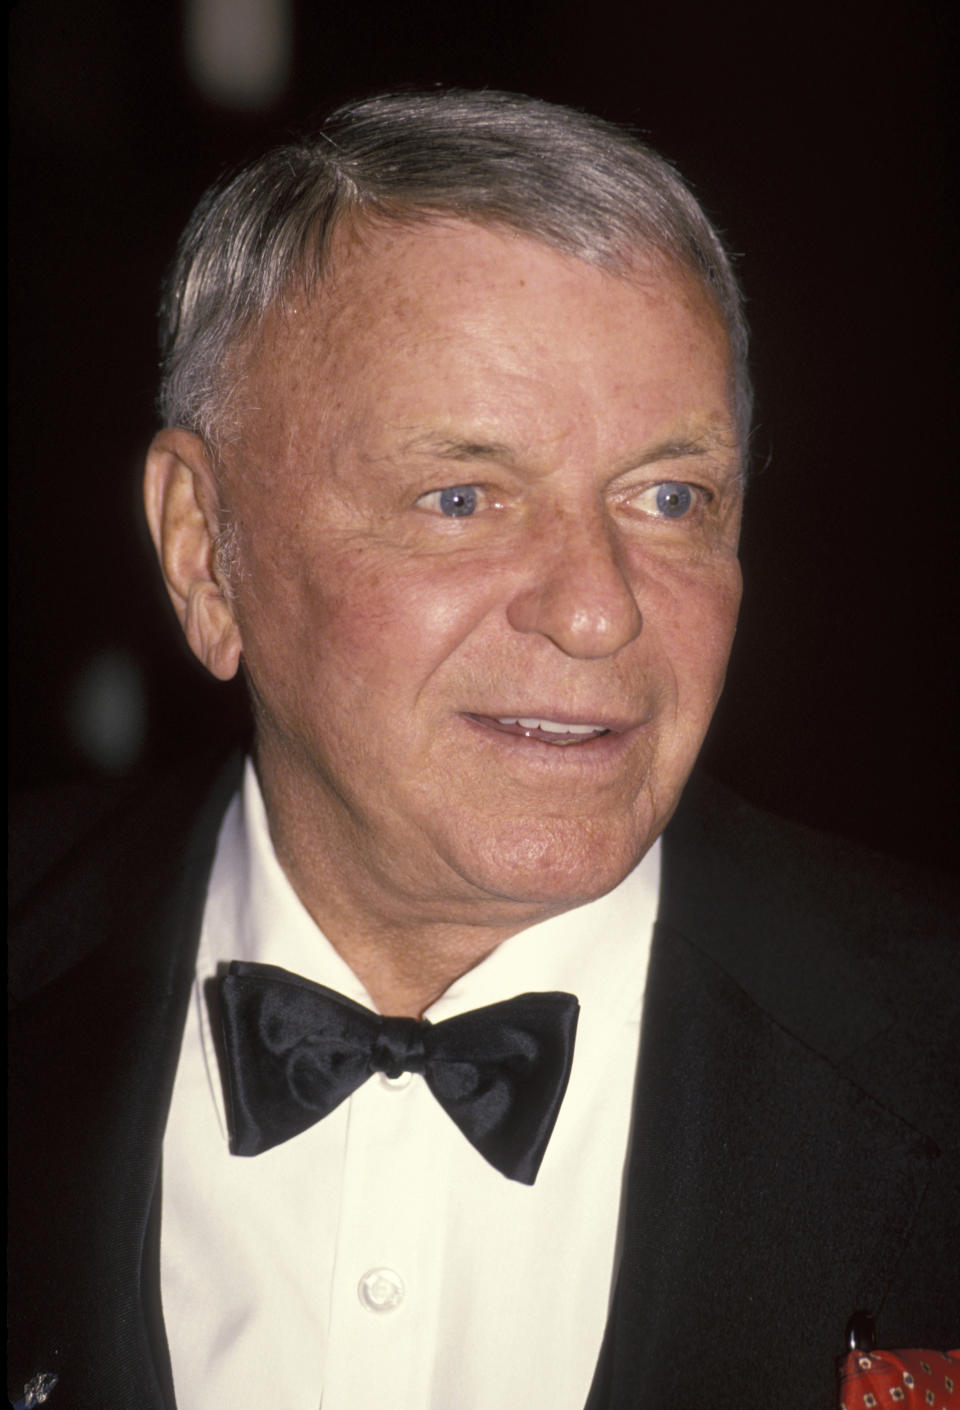 Frank Sinatra during Mission Hills Celebrity Sports Invitational - November 30, 1991 at Westin Mission Hills Resort in Rancho Mirage, California, United States. (Photo by Ron Galella, Ltd./Ron Galella Collection via Getty Images)